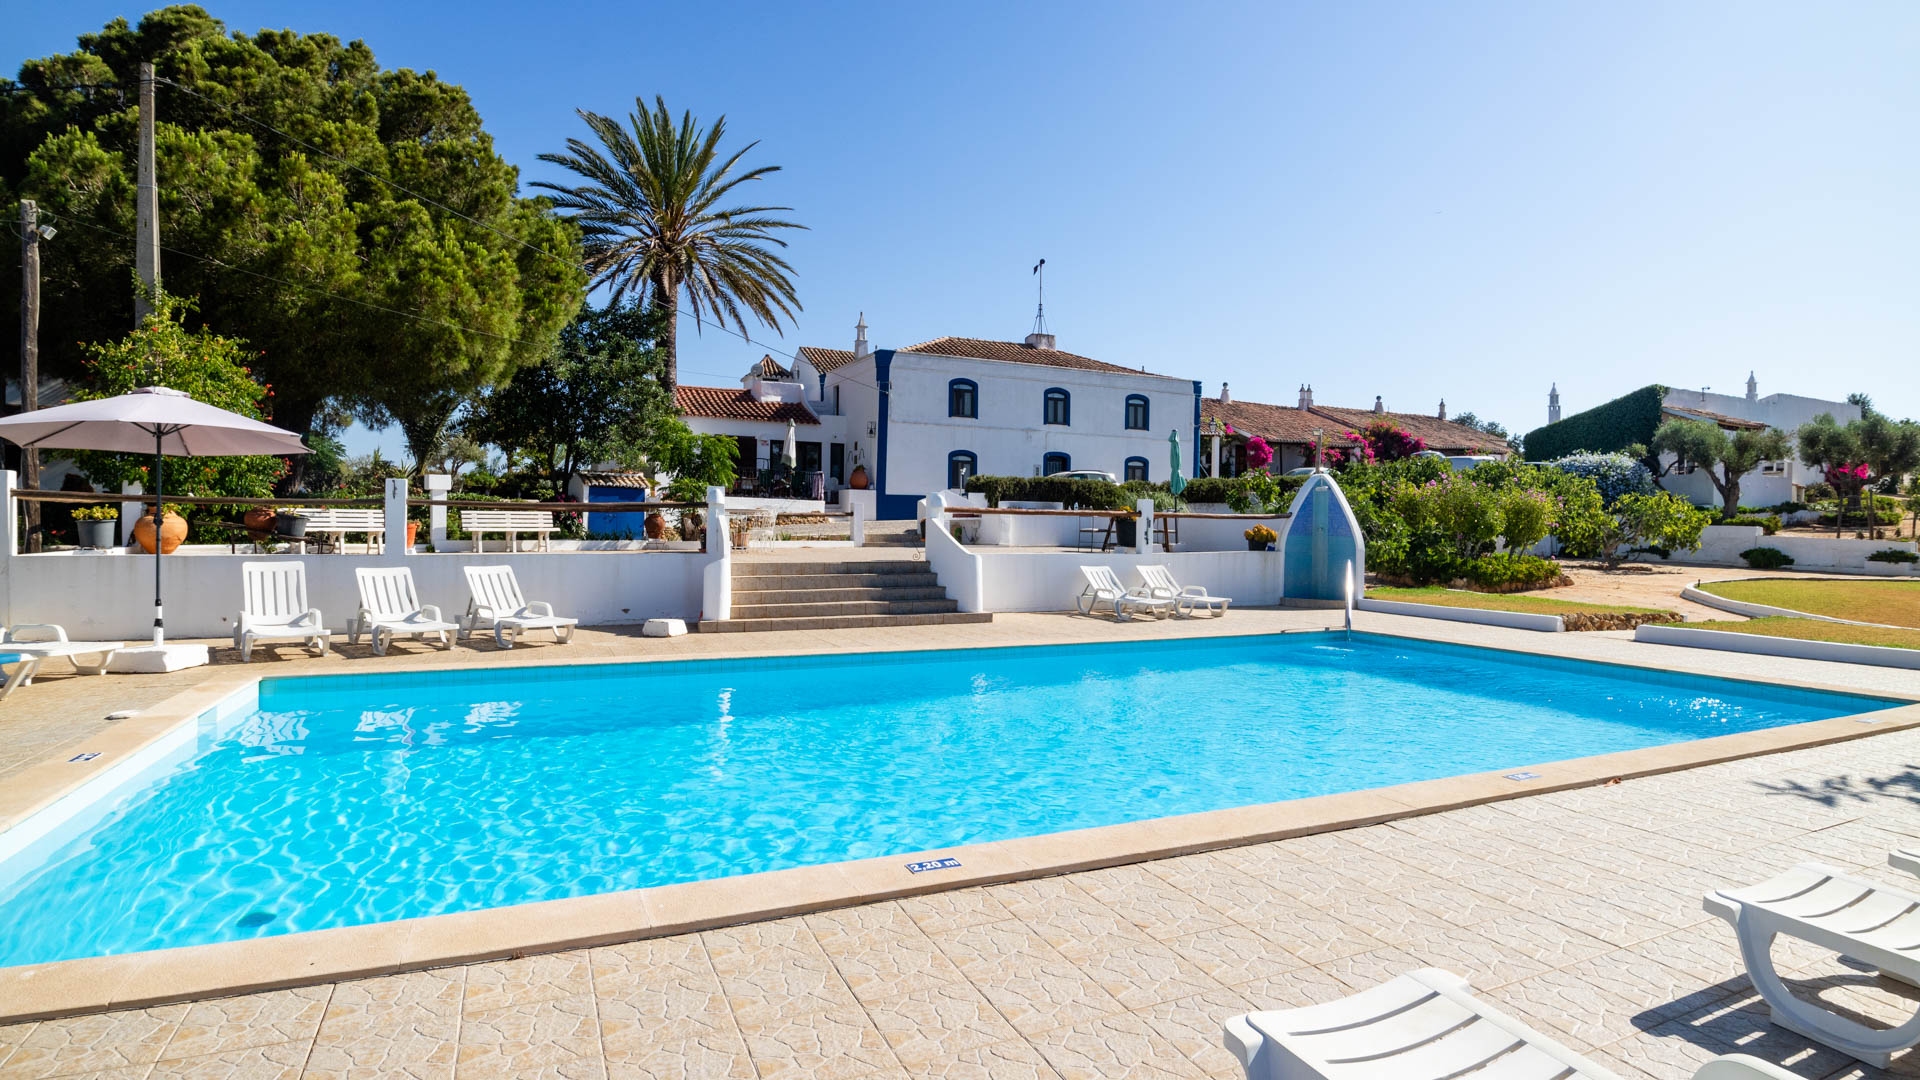 15 Bedroom Quinta with 11 Apartments, Guia | VM1986 Located in Guia, Albufeira, this Quinta with 11 separate apartments, pool and a big plot of land is a great opportunity for holiday rentals or possibly a farm. 